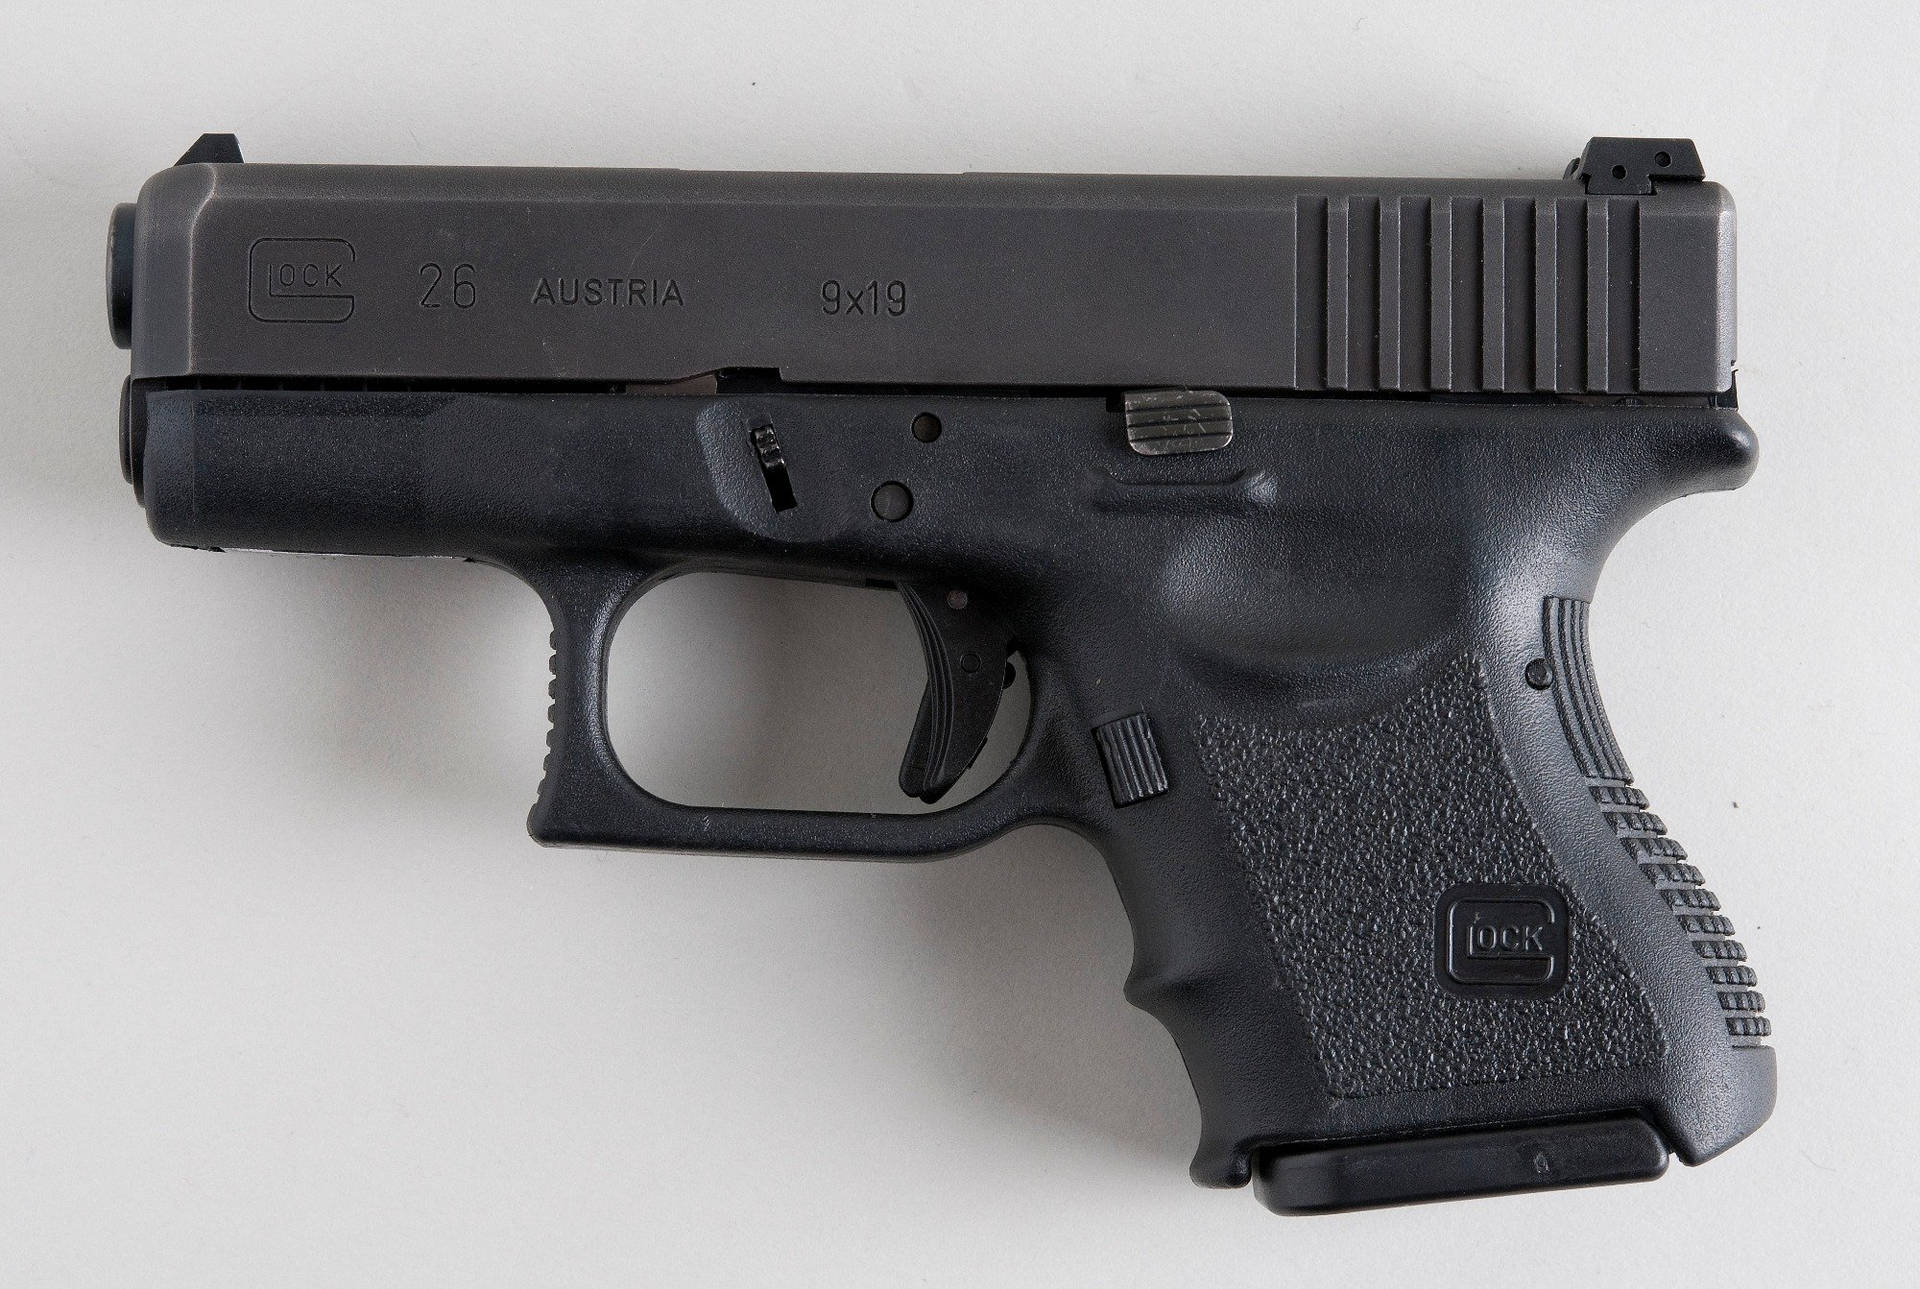 Glock Pistol - Precision And Safety Defined Background